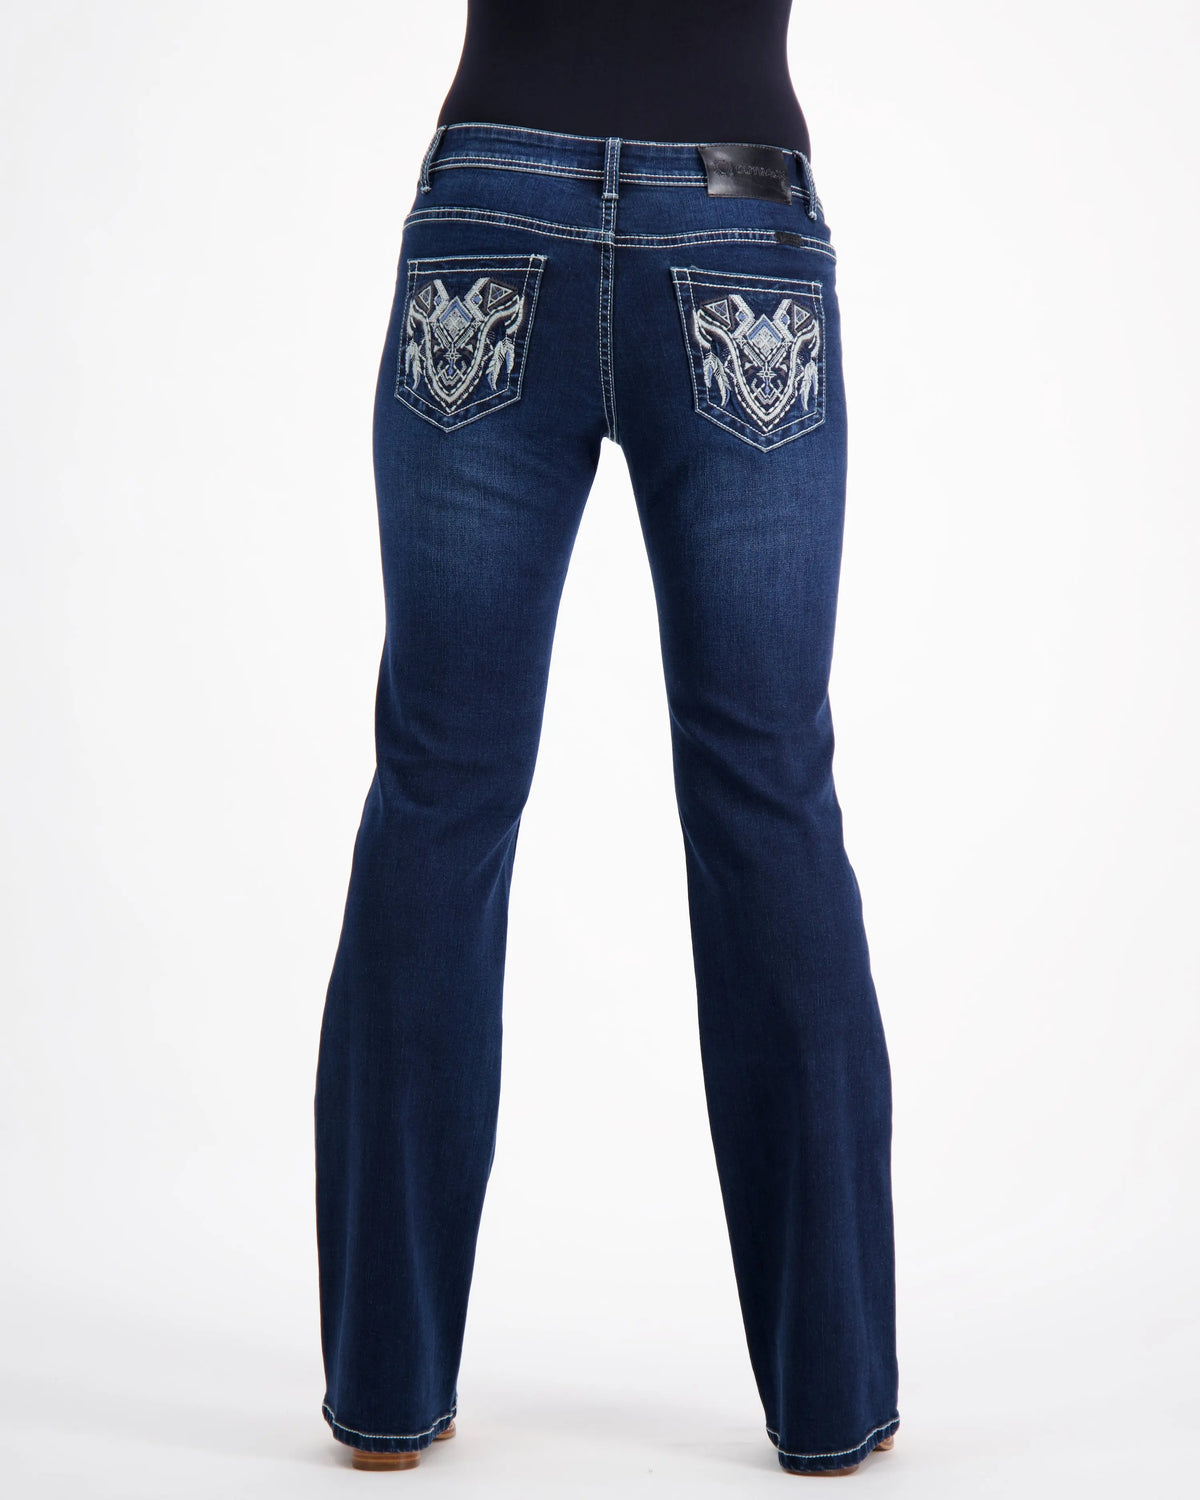 Stretch Denim Jeans Outback Supply Co Ashton Western Style